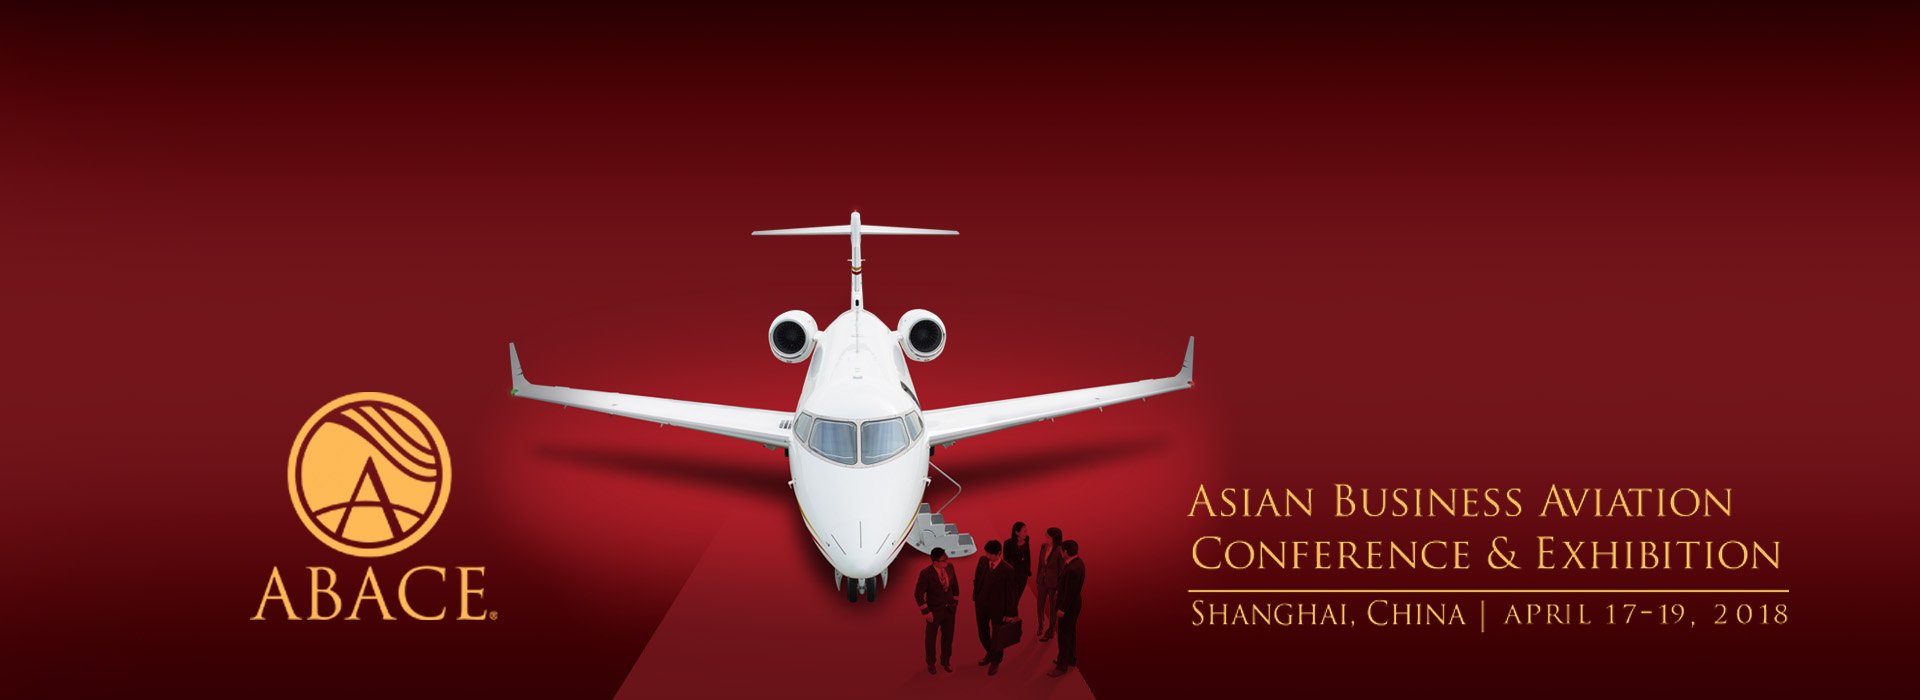 Euro Jet To Attend ABACE In Shanghai